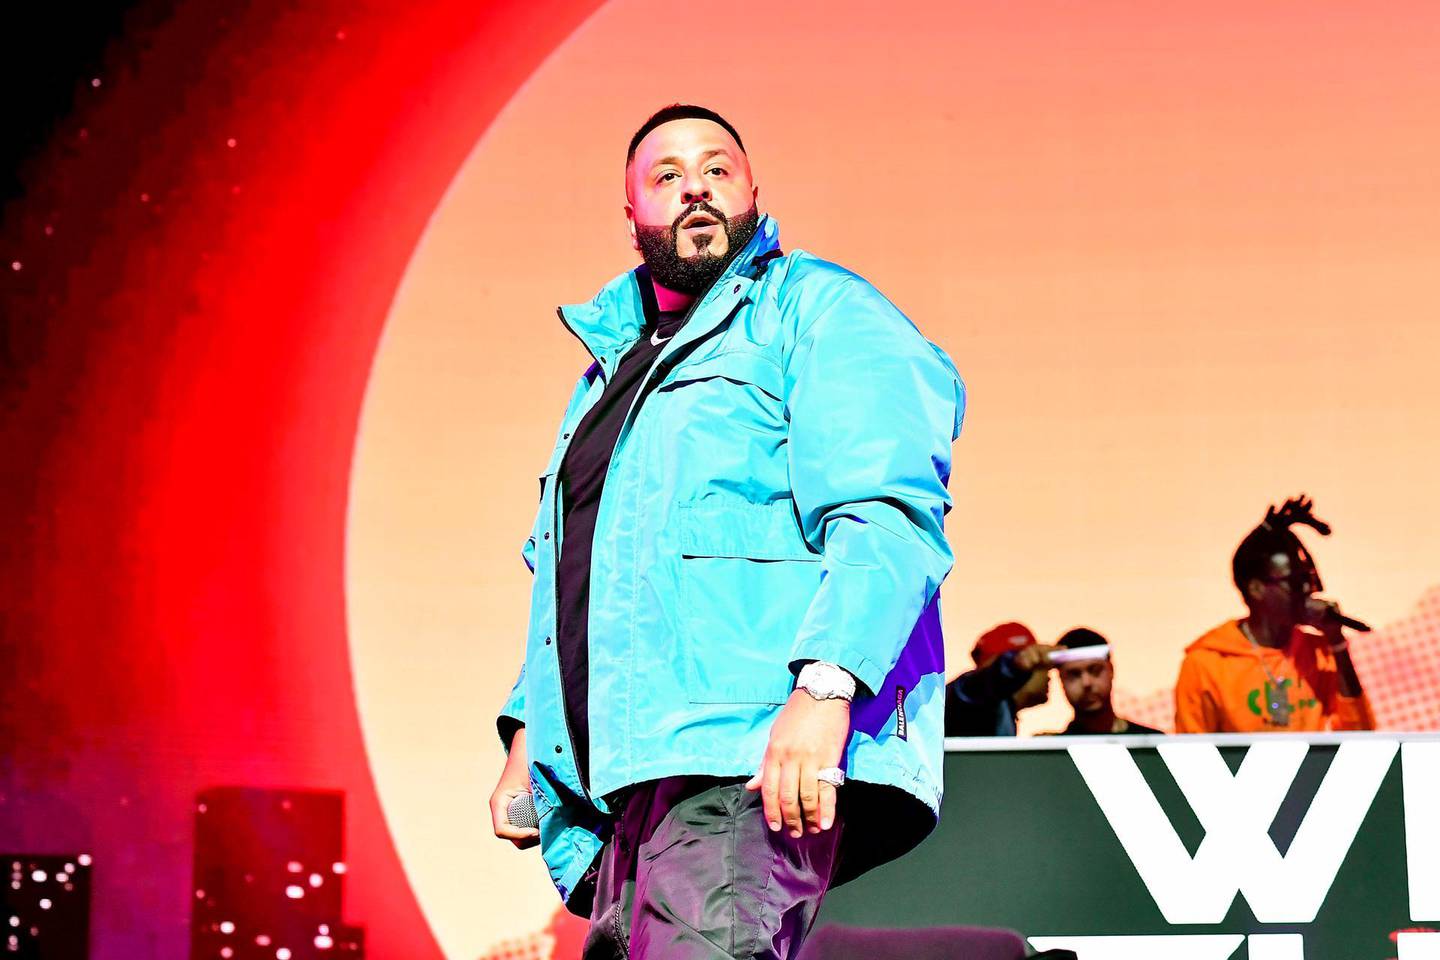 MIAMI, FLORIDA - JANUARY 30: DJ Khaled performs onstage during the EA Sports Bowl at Bud Light Super Bowl Music Fest on January 30, 2020 in Miami, Florida.   Frazer Harrison/Getty Images for EA Sports Bowl at Bud Light Super Bowl Music Fest /AFP